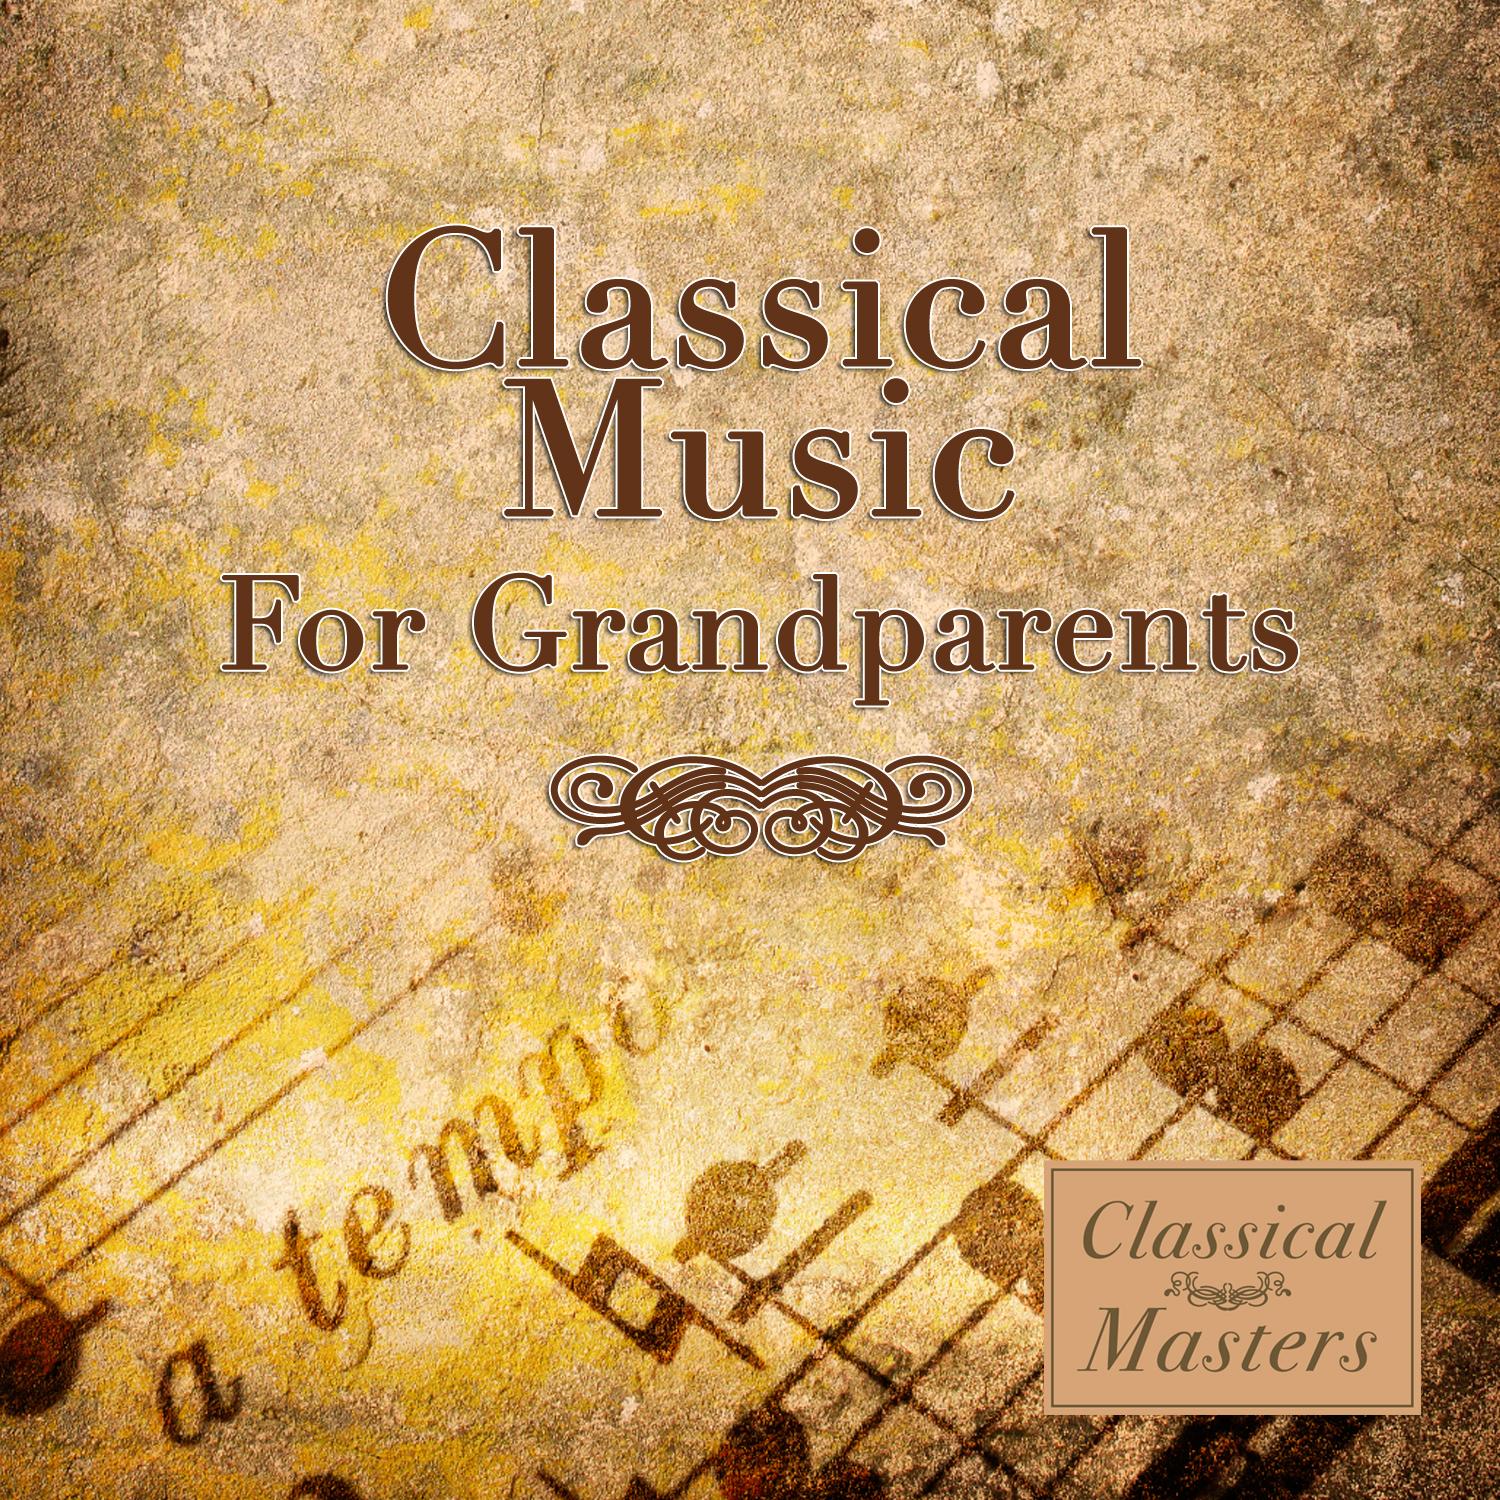 Classical Music For Grandparents